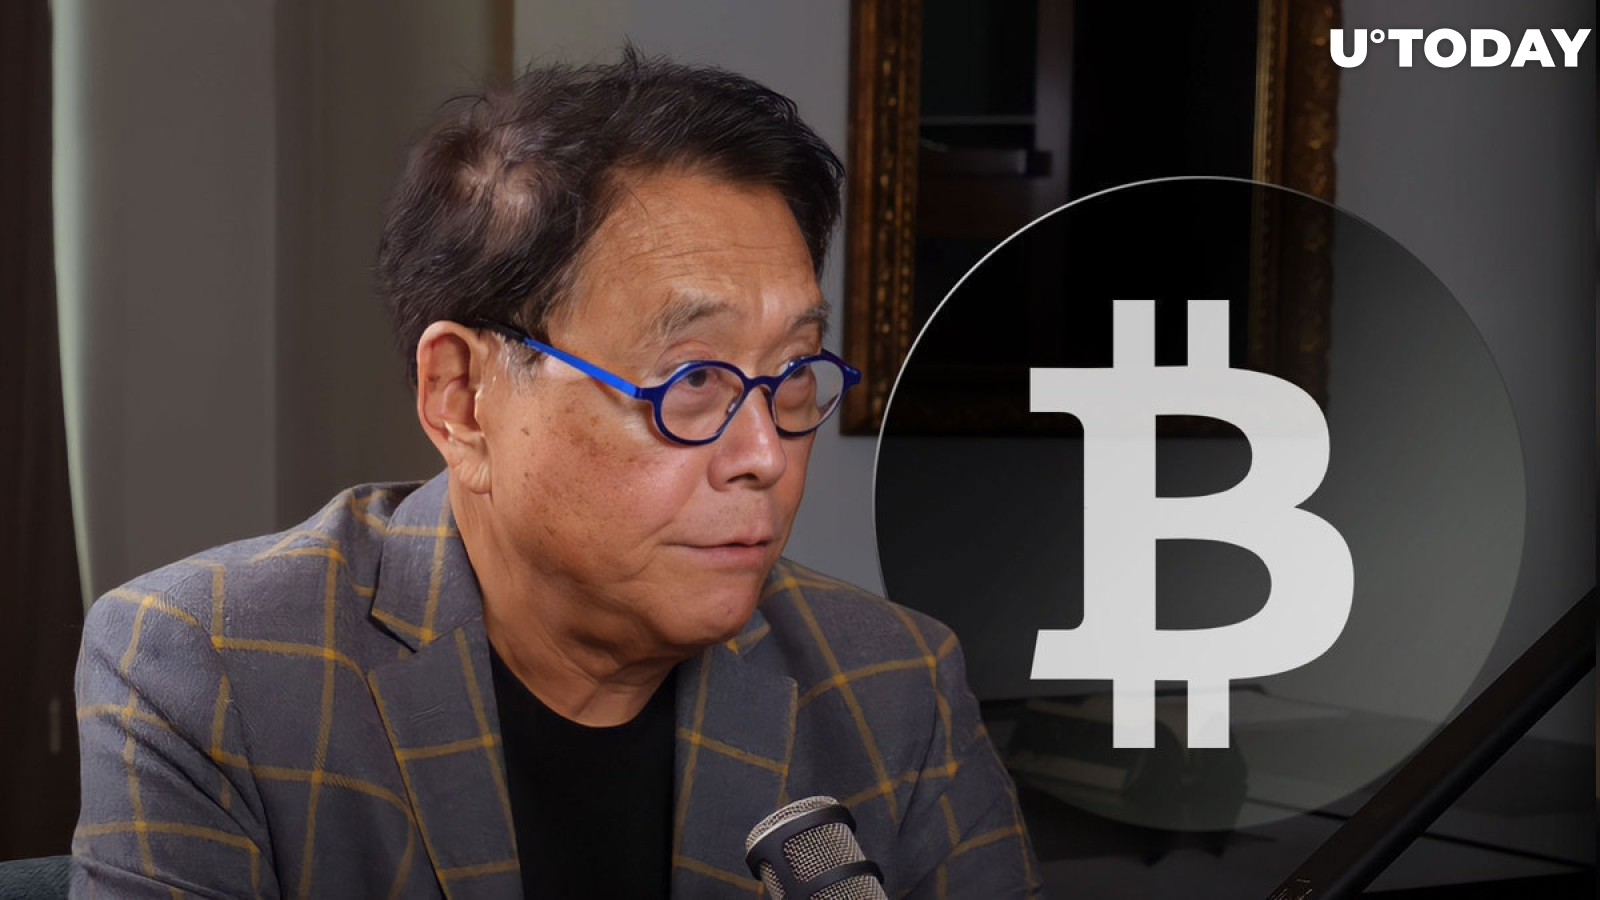 'Rich Dad Poor Dad' Author Says Time to Buy ‘Real Bitcoin’ as Giant Bank Goes Bust